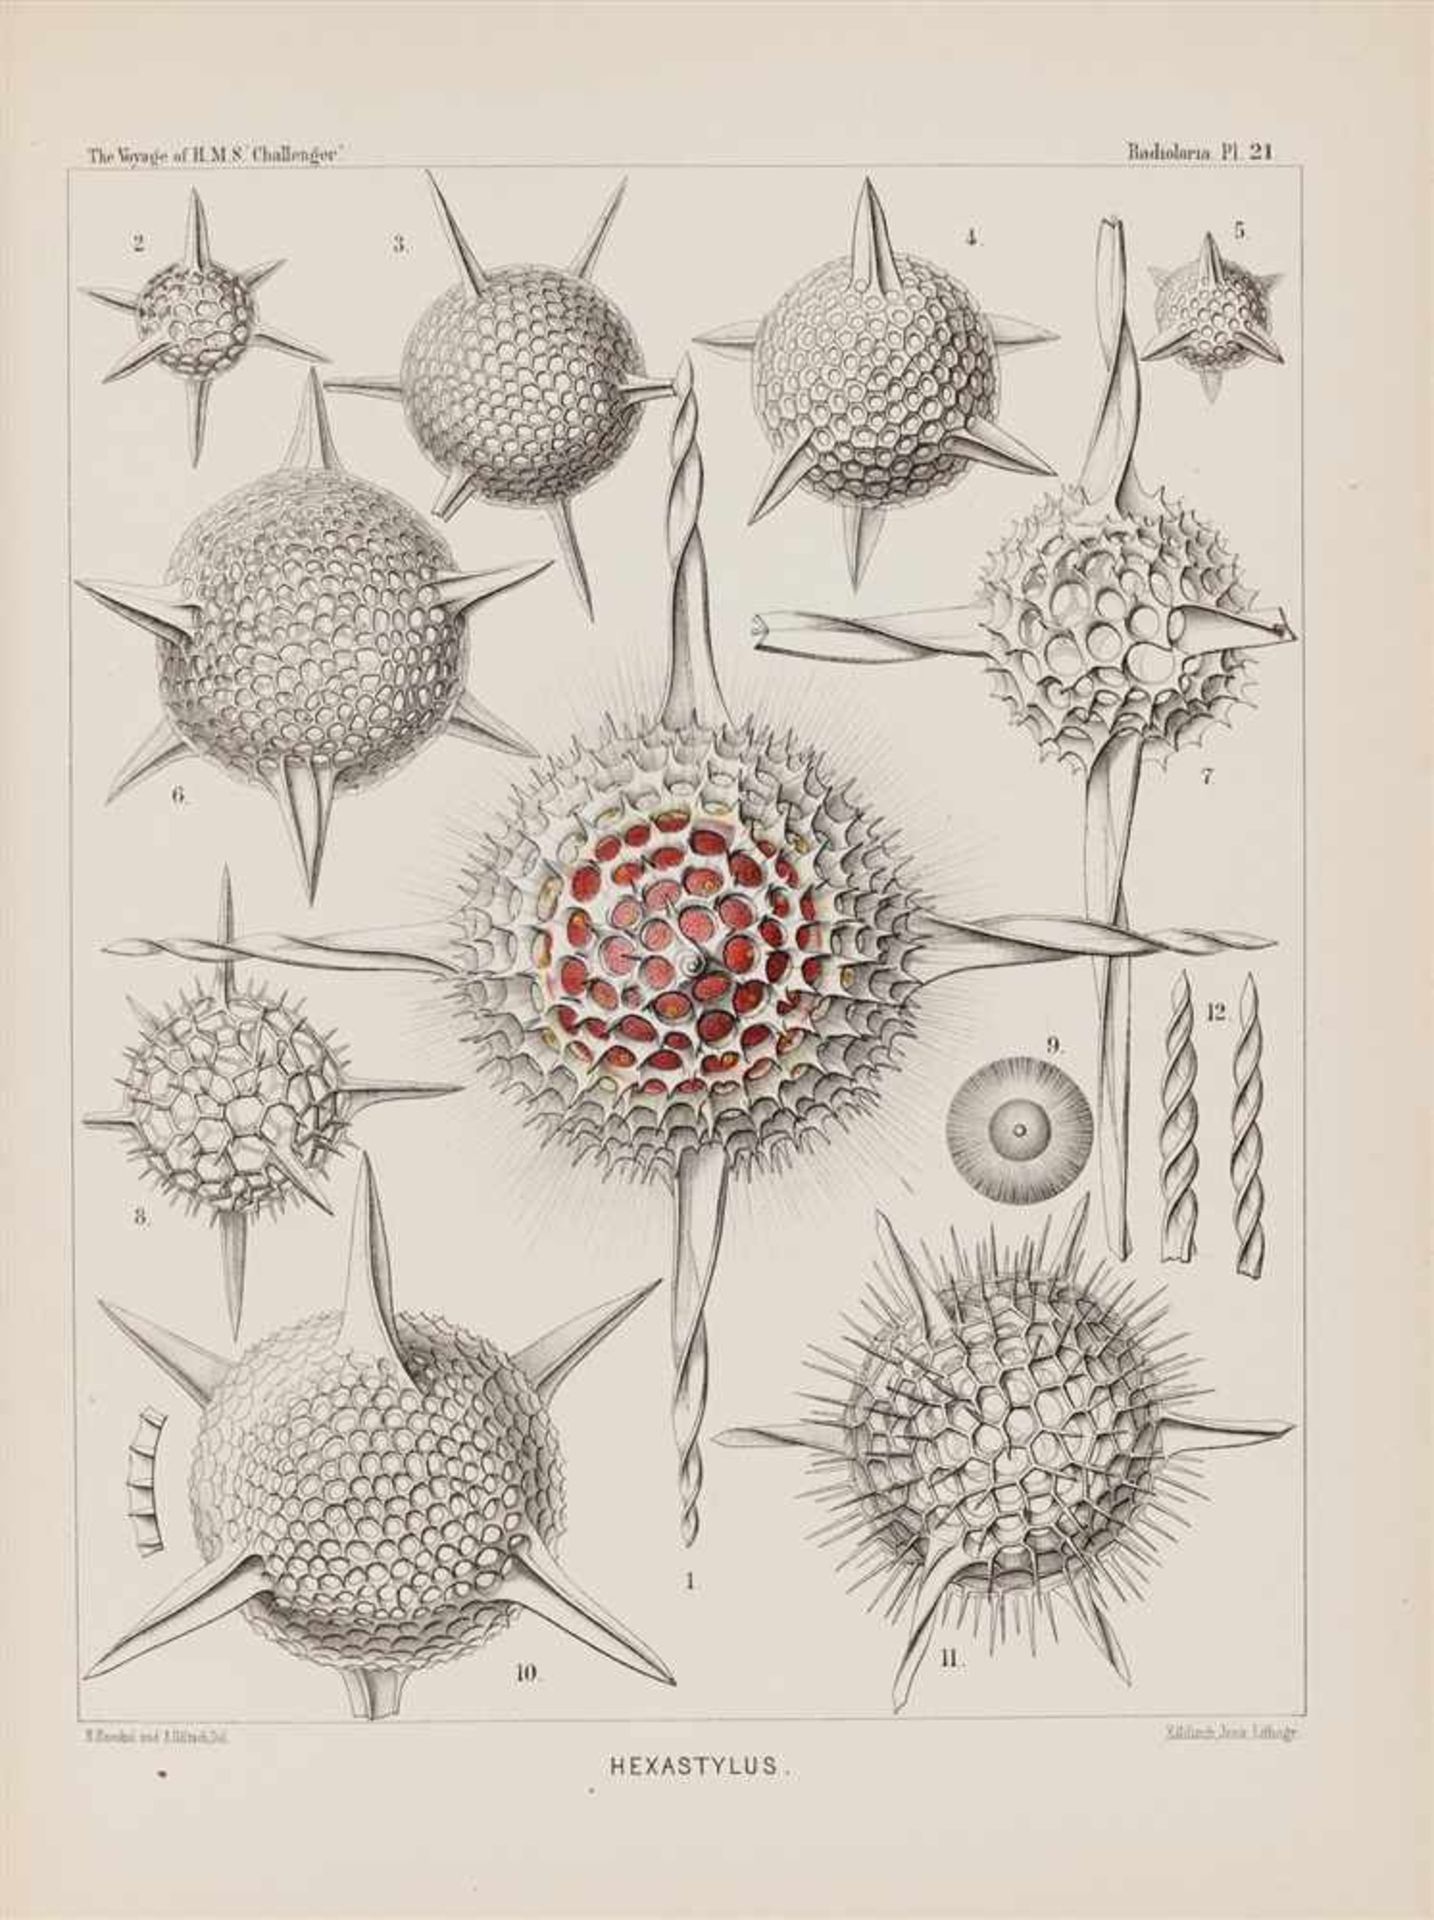 Haeckel, Ernst: Report on the Scientific Results of the Voyage of H.M.S. Challenger during the years